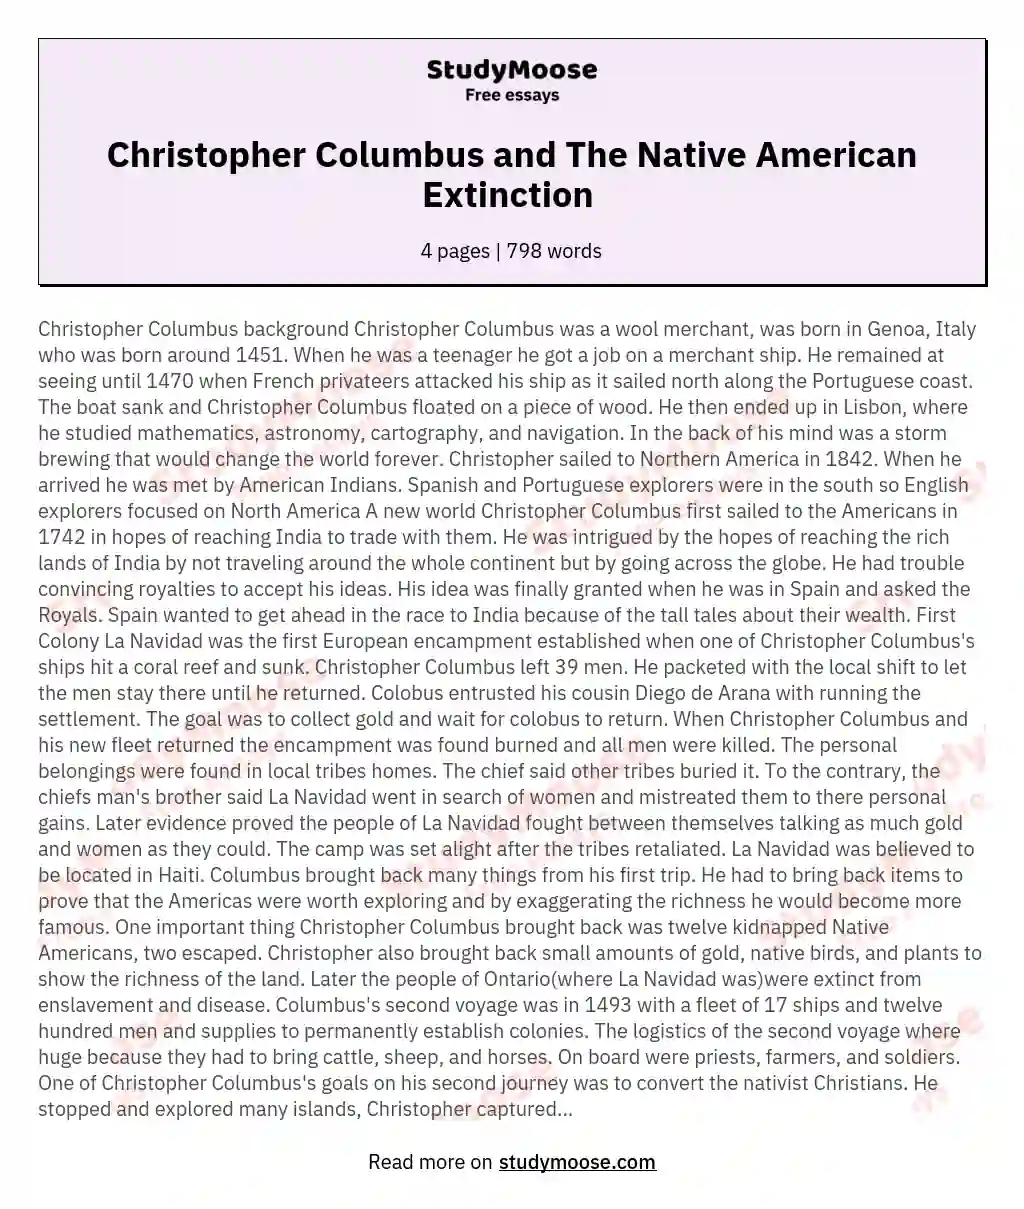 Christopher Columbus and The Native American Extinction  essay